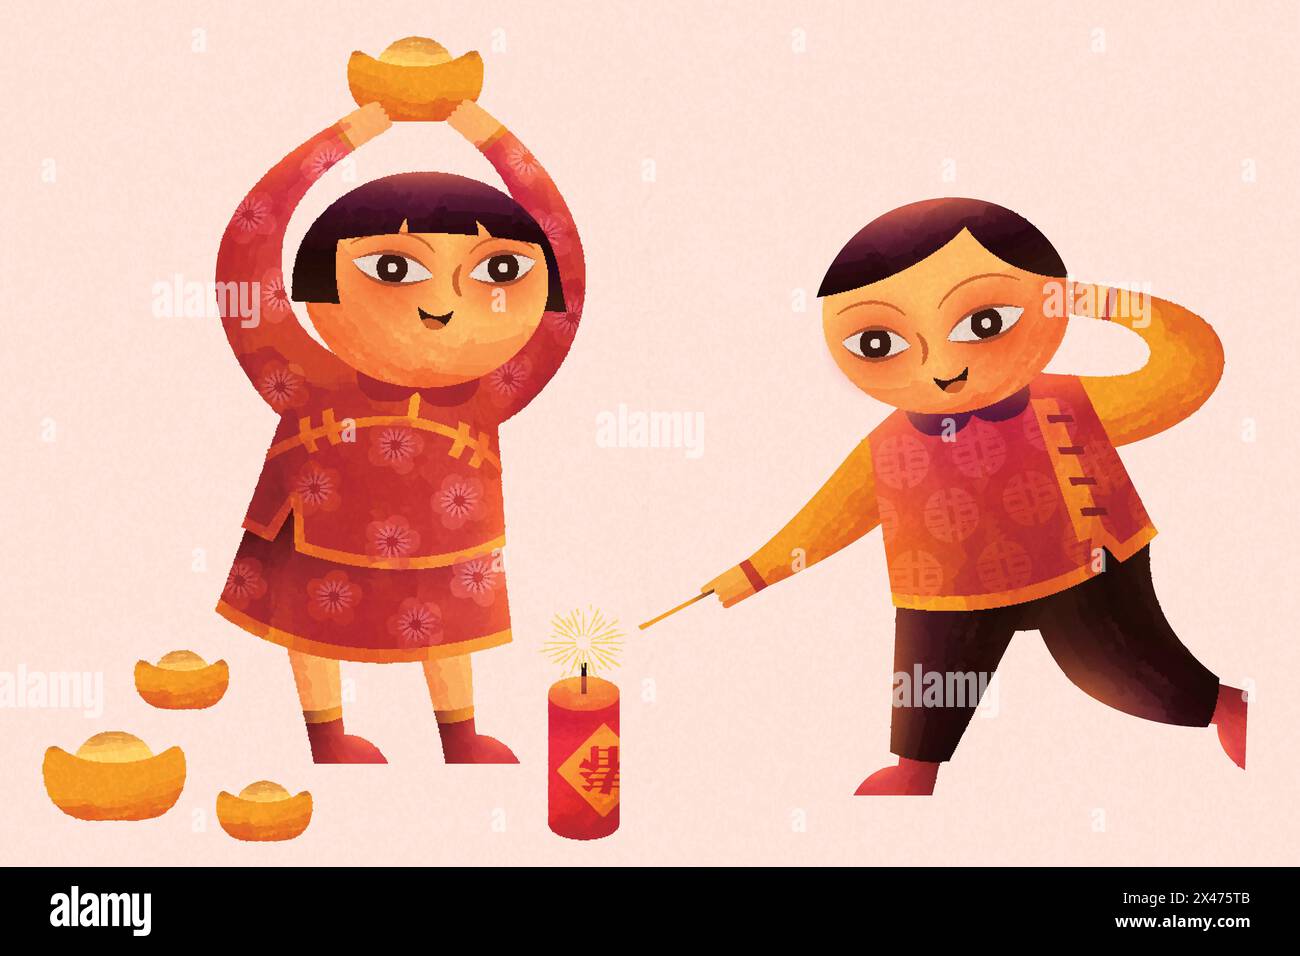 Cute children lighting firecrackers and holding gold ingot in doodle style Stock Vector